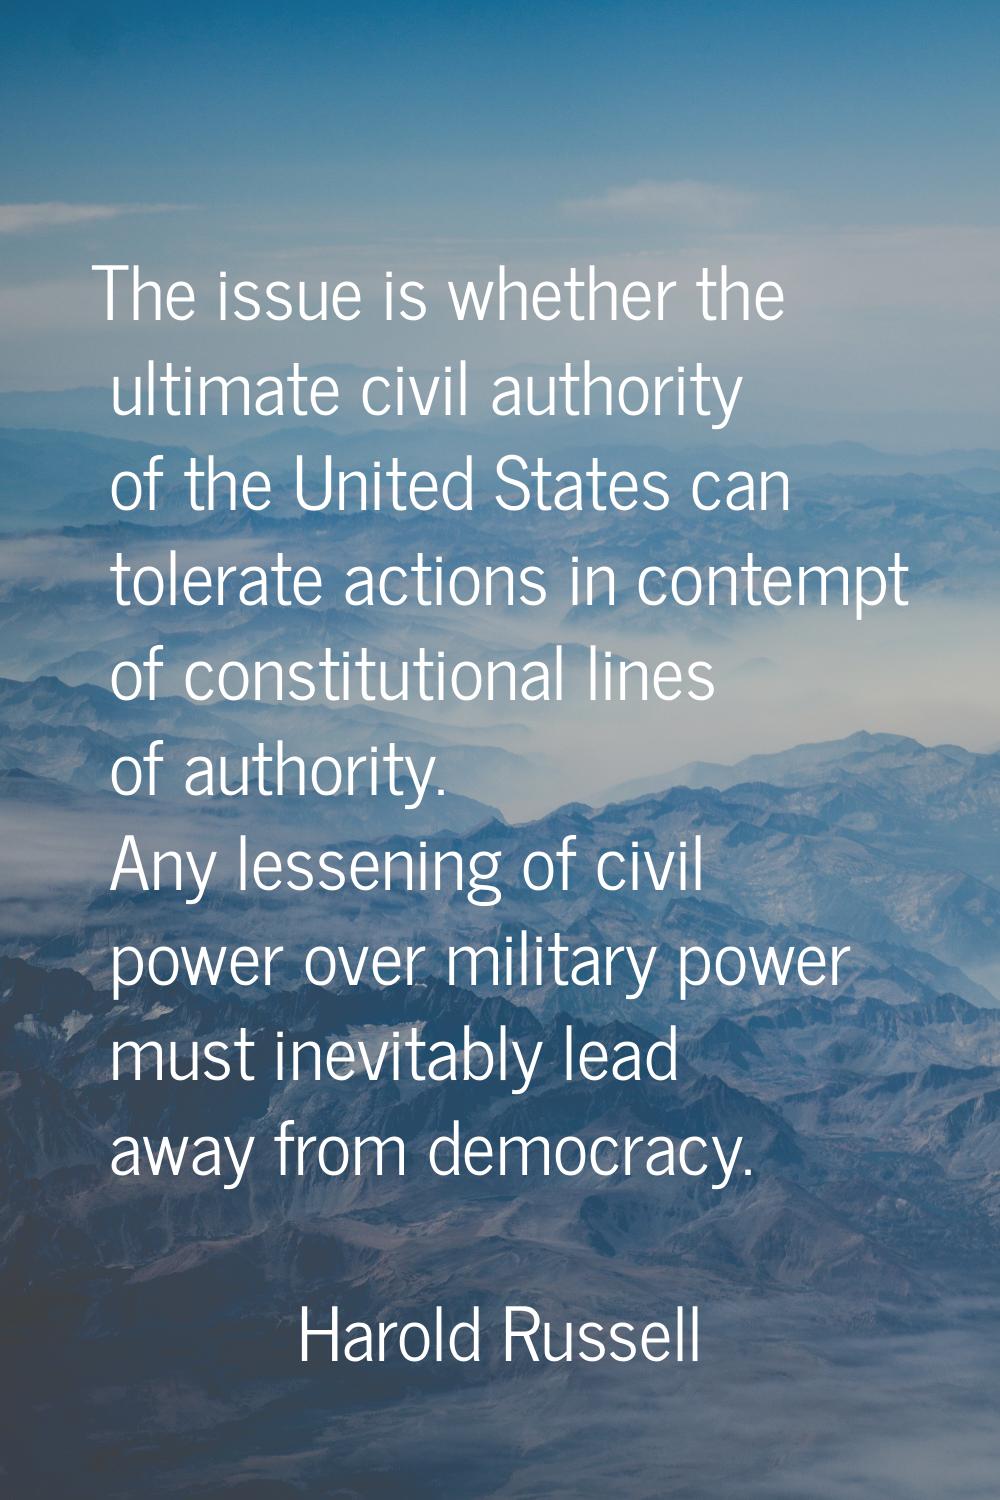 The issue is whether the ultimate civil authority of the United States can tolerate actions in cont